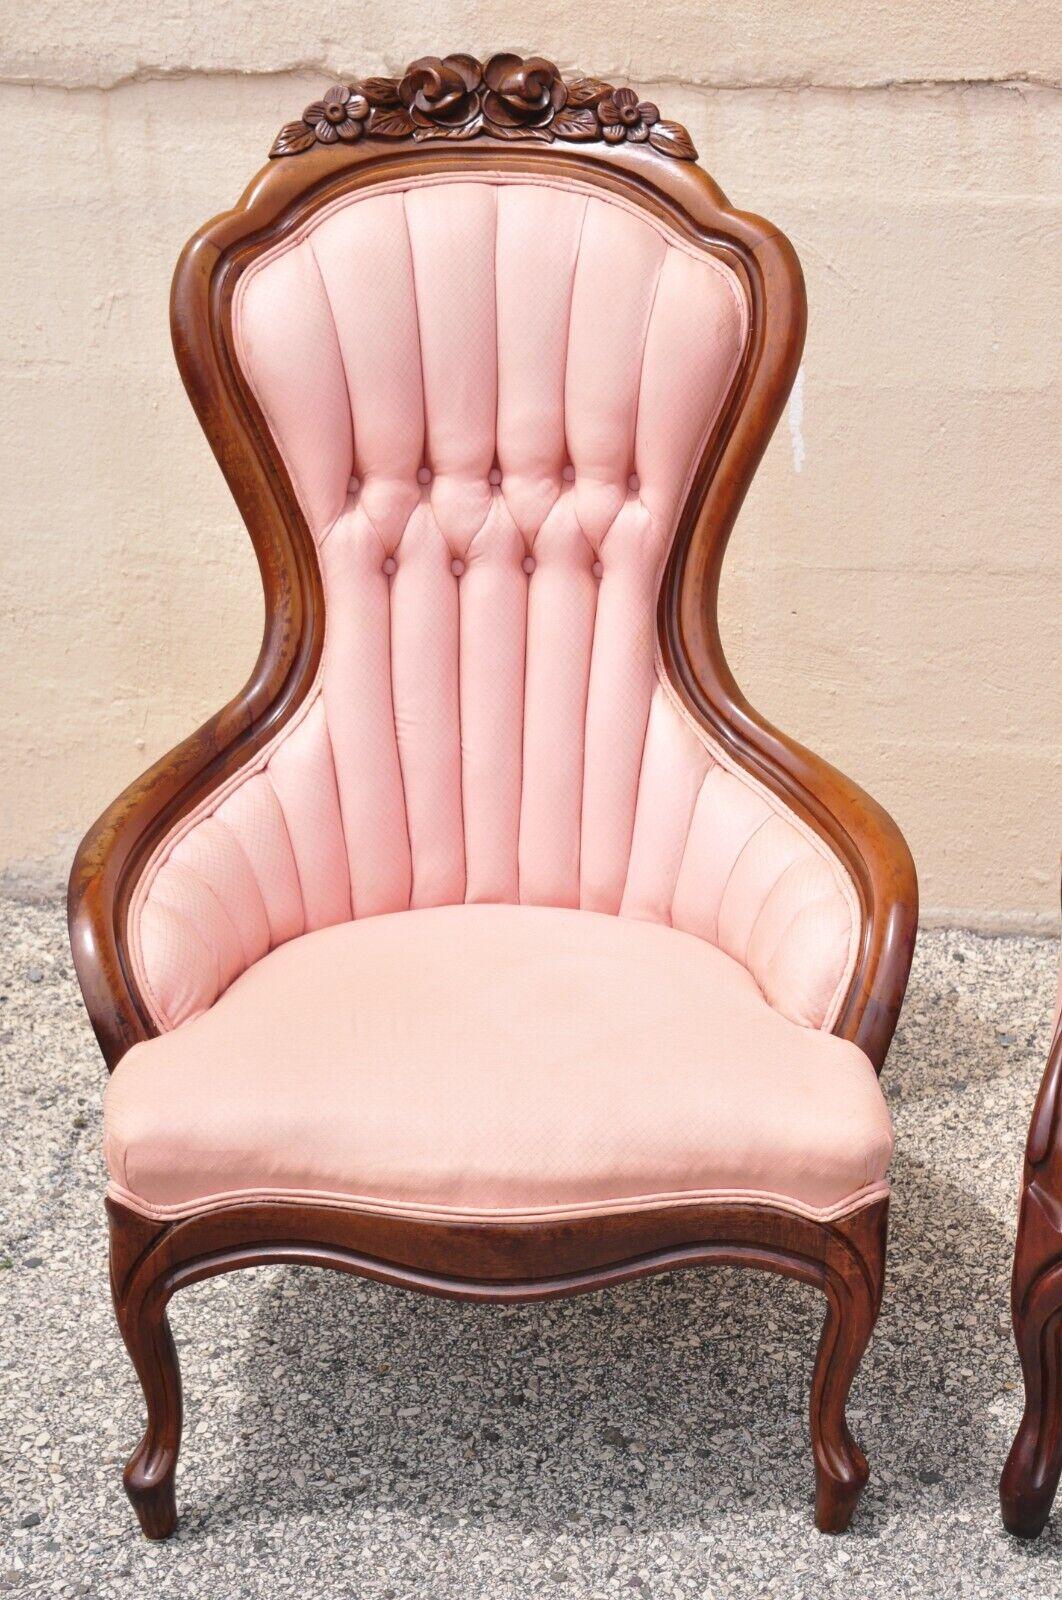 victorian chairs styles